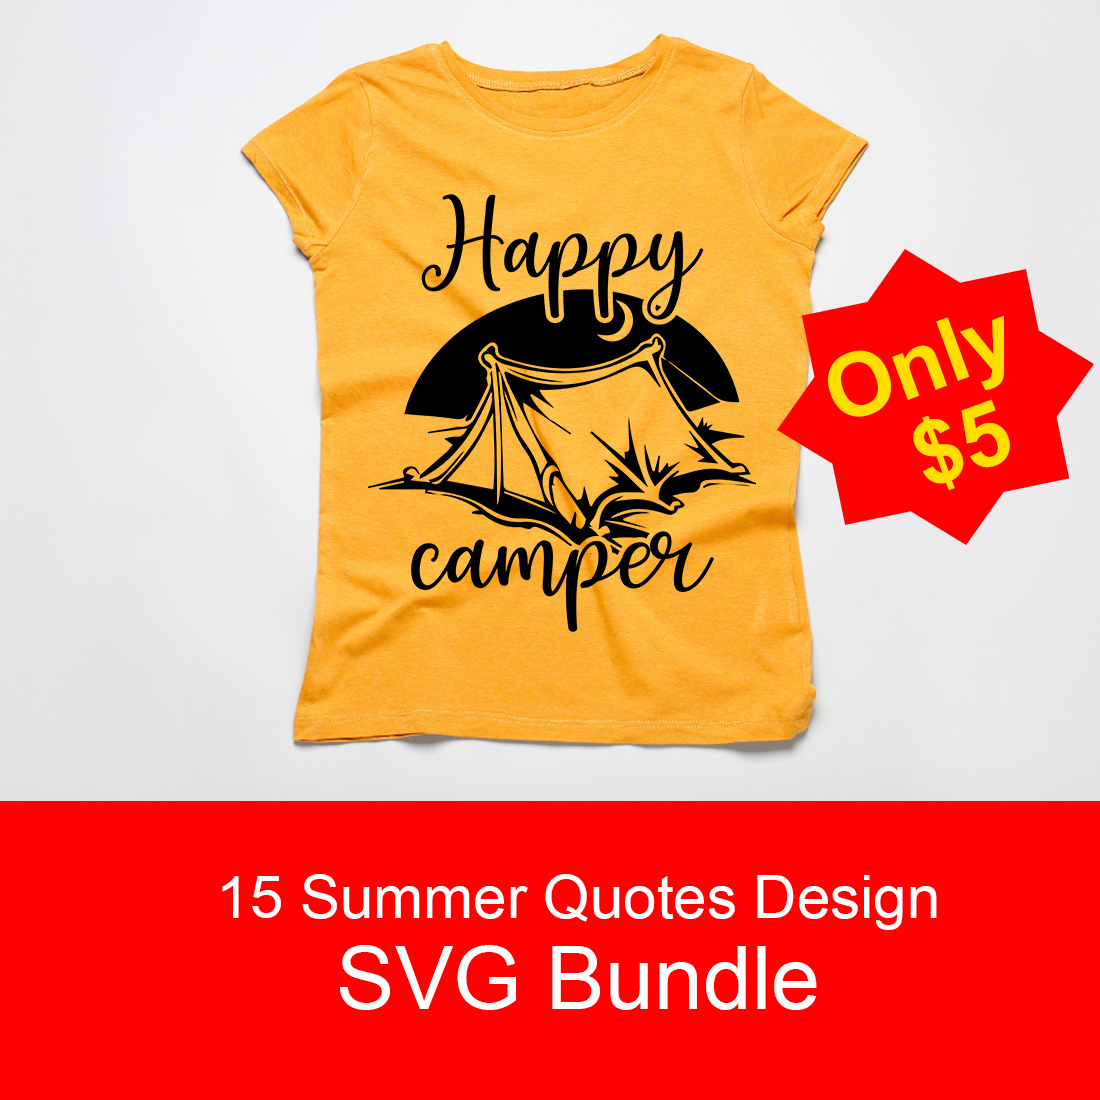 T-shirt image with adorable "Happy camper" slogan